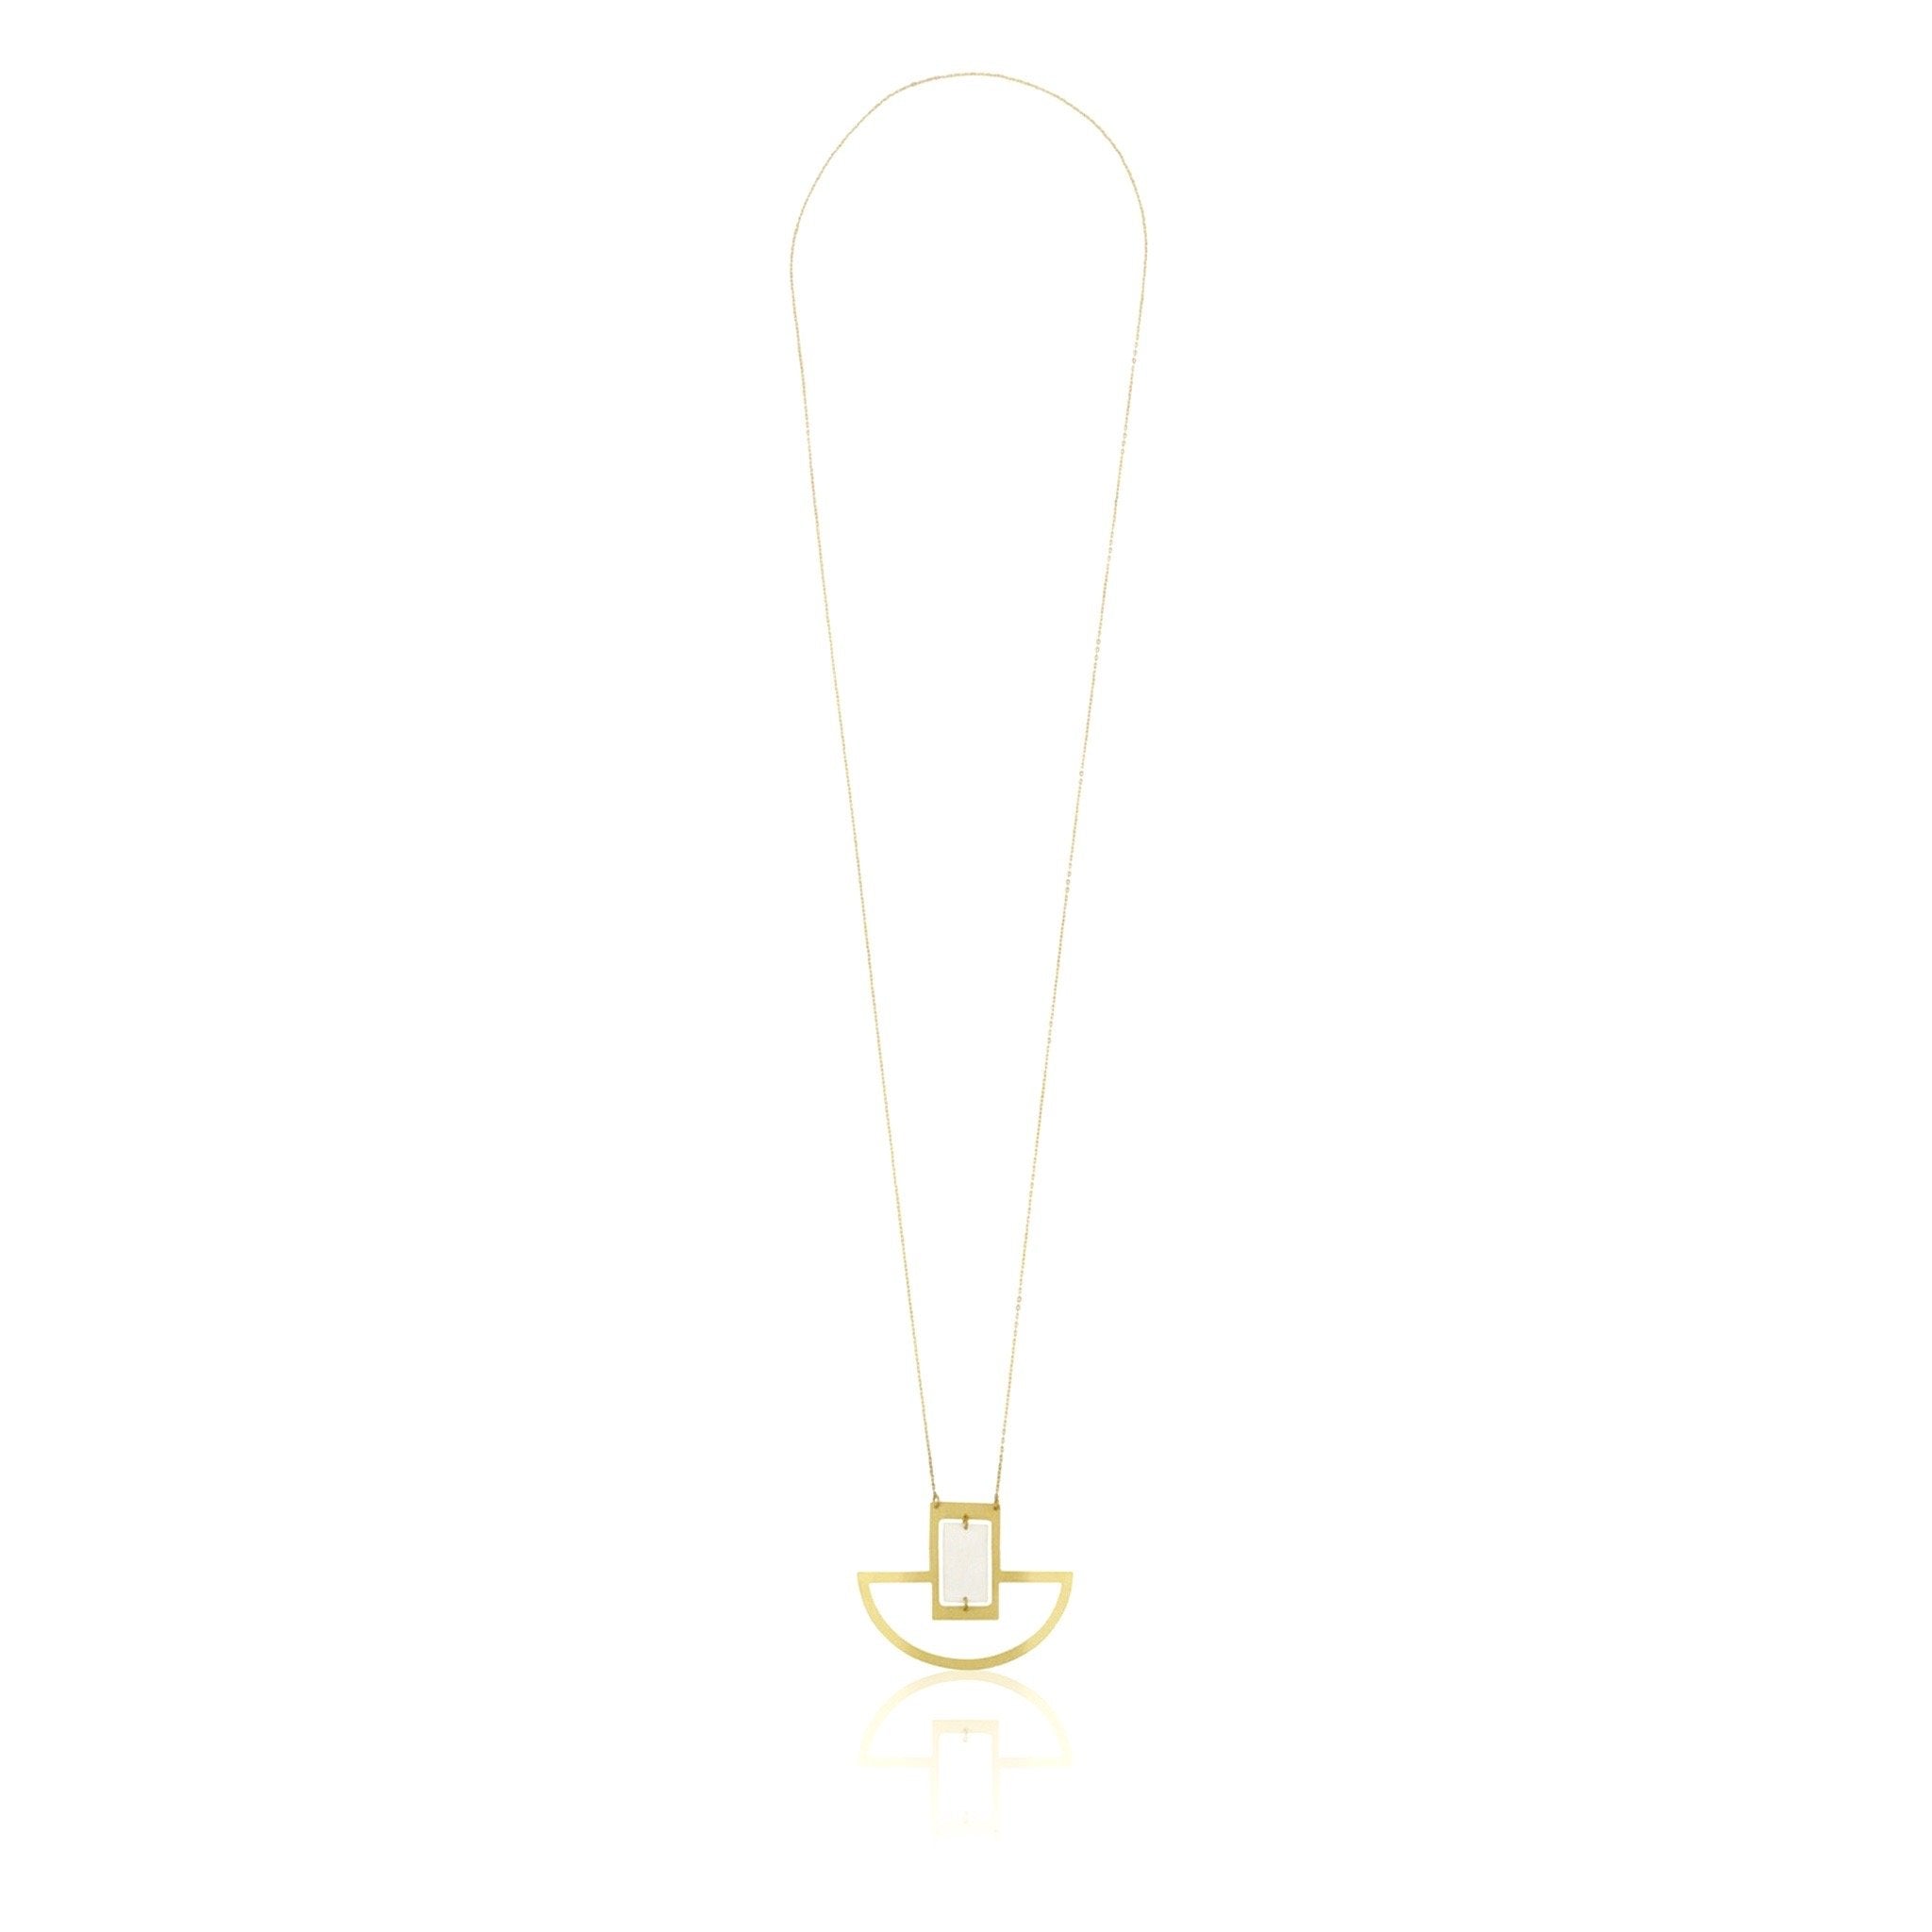 Bar on A Boat Necklace - Gold Silver